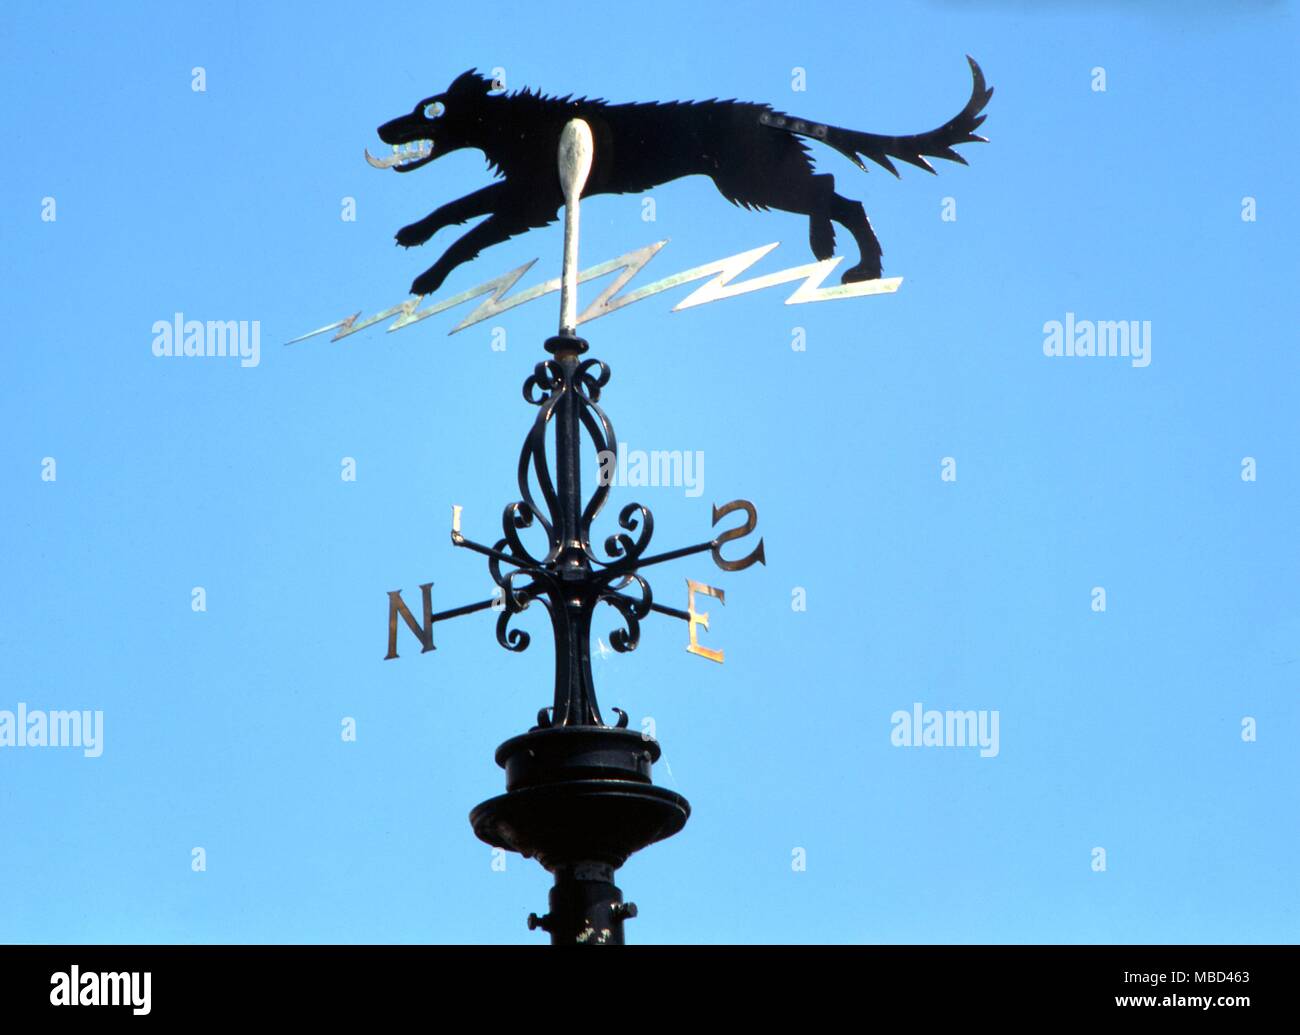 Ghostly dogs and black dogs - the demonic black dog atop the weathervane at Bungay, Suffolk. It is said that on 4th August 1577 a black dog appeared in Bungay church and wrung the necks of some members of congregation. - ©Charles Walker / Stock Photo